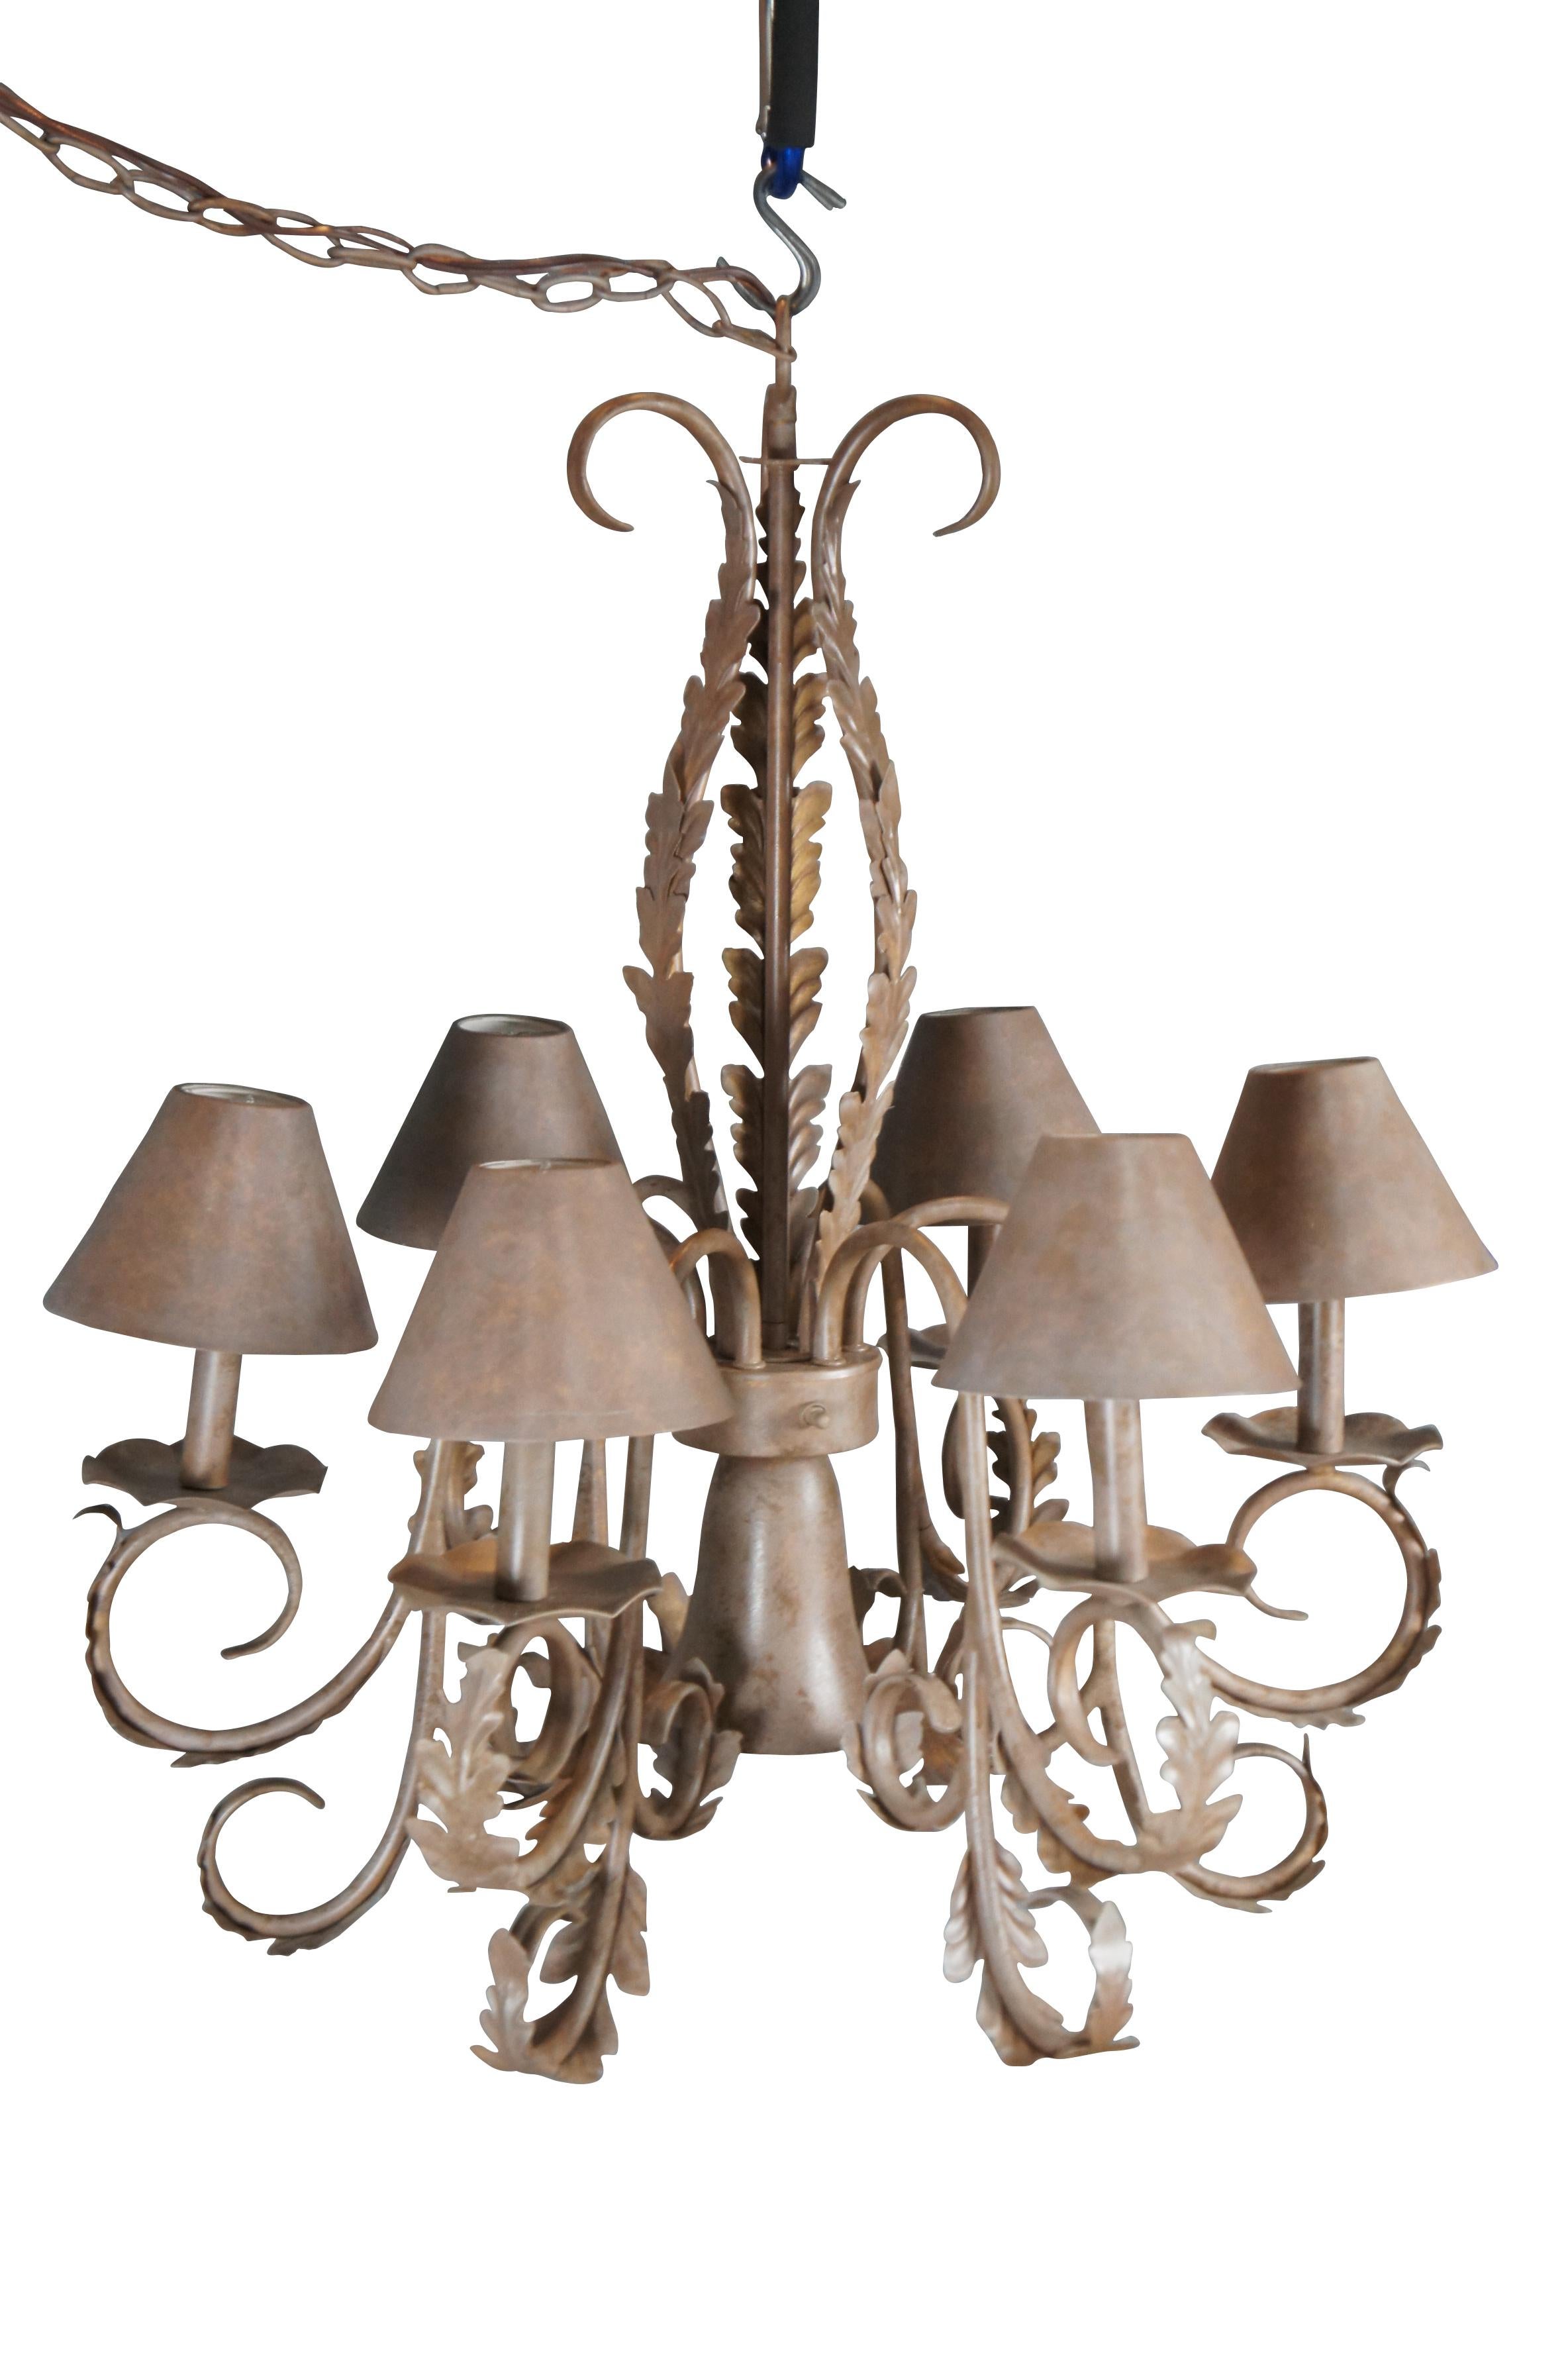 French Provincial Vintage French Scrolled Iron 7 Light Acanthus Leaf Chandelier 31